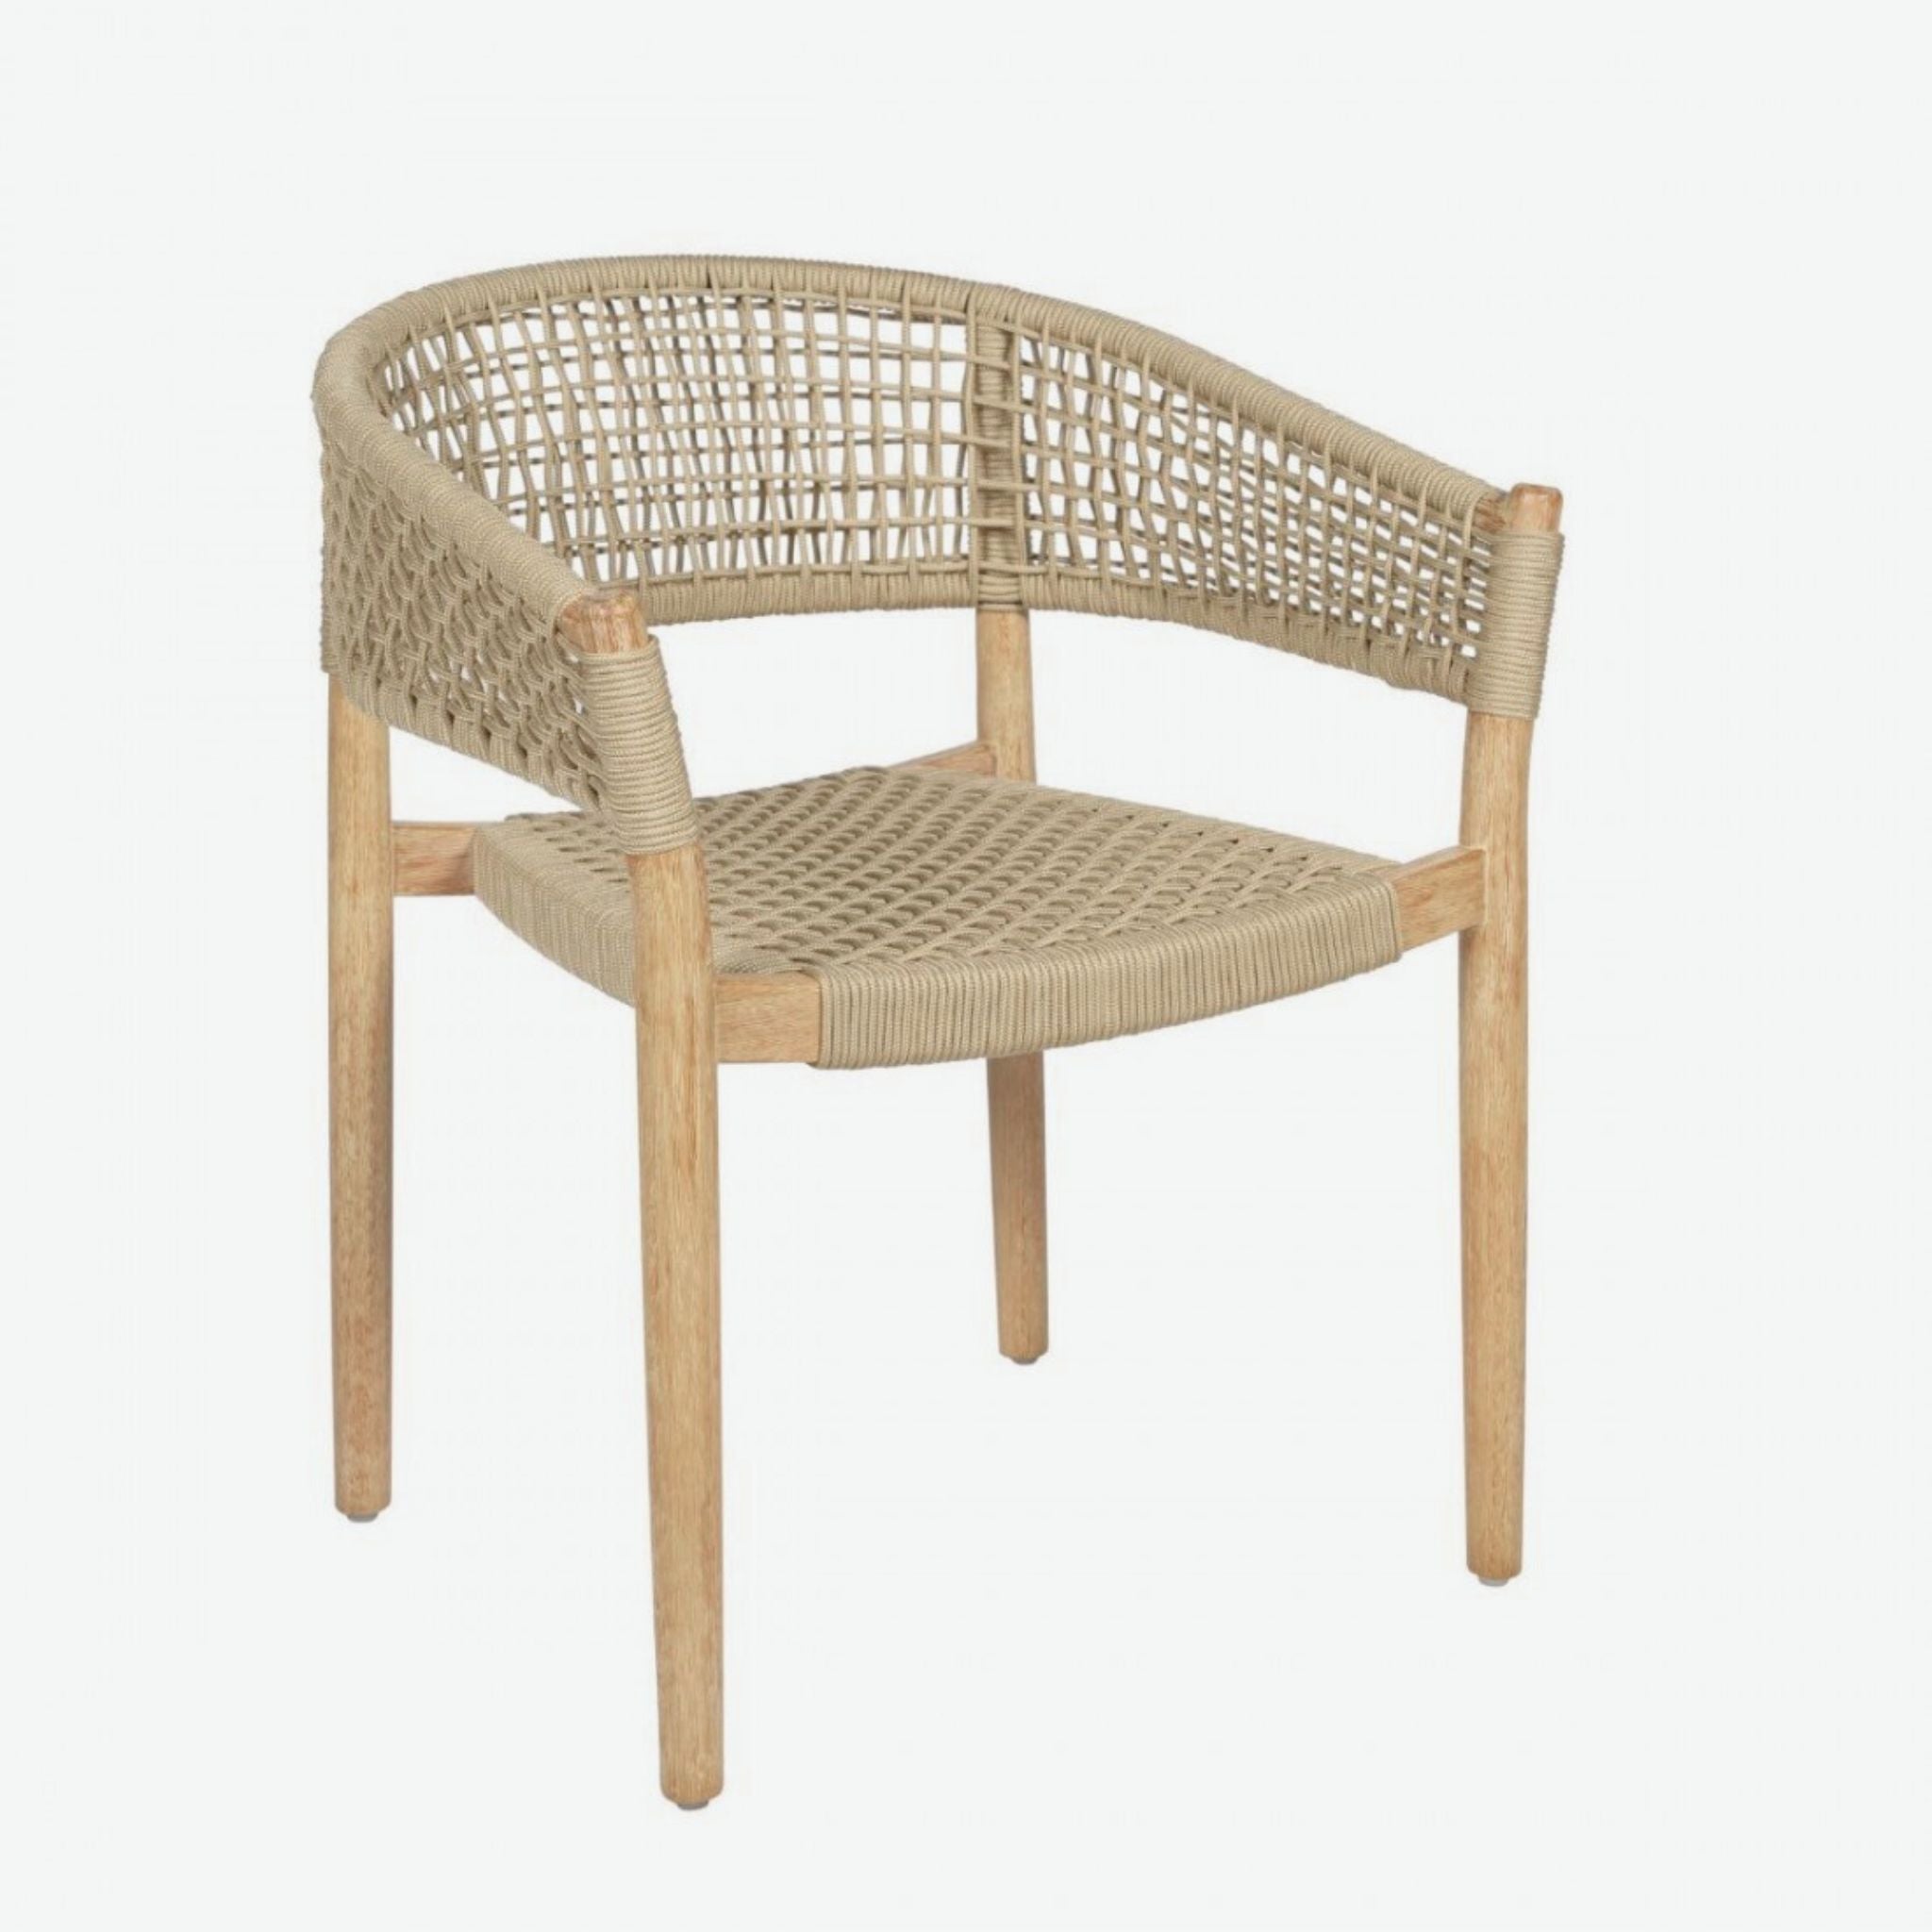 Crisal Decoracion Ibiza Outdoor Chair with Rounded Backrest Eucalyptus Wood and Sand Coloured Rope Set of 2 - ModernistaLiving